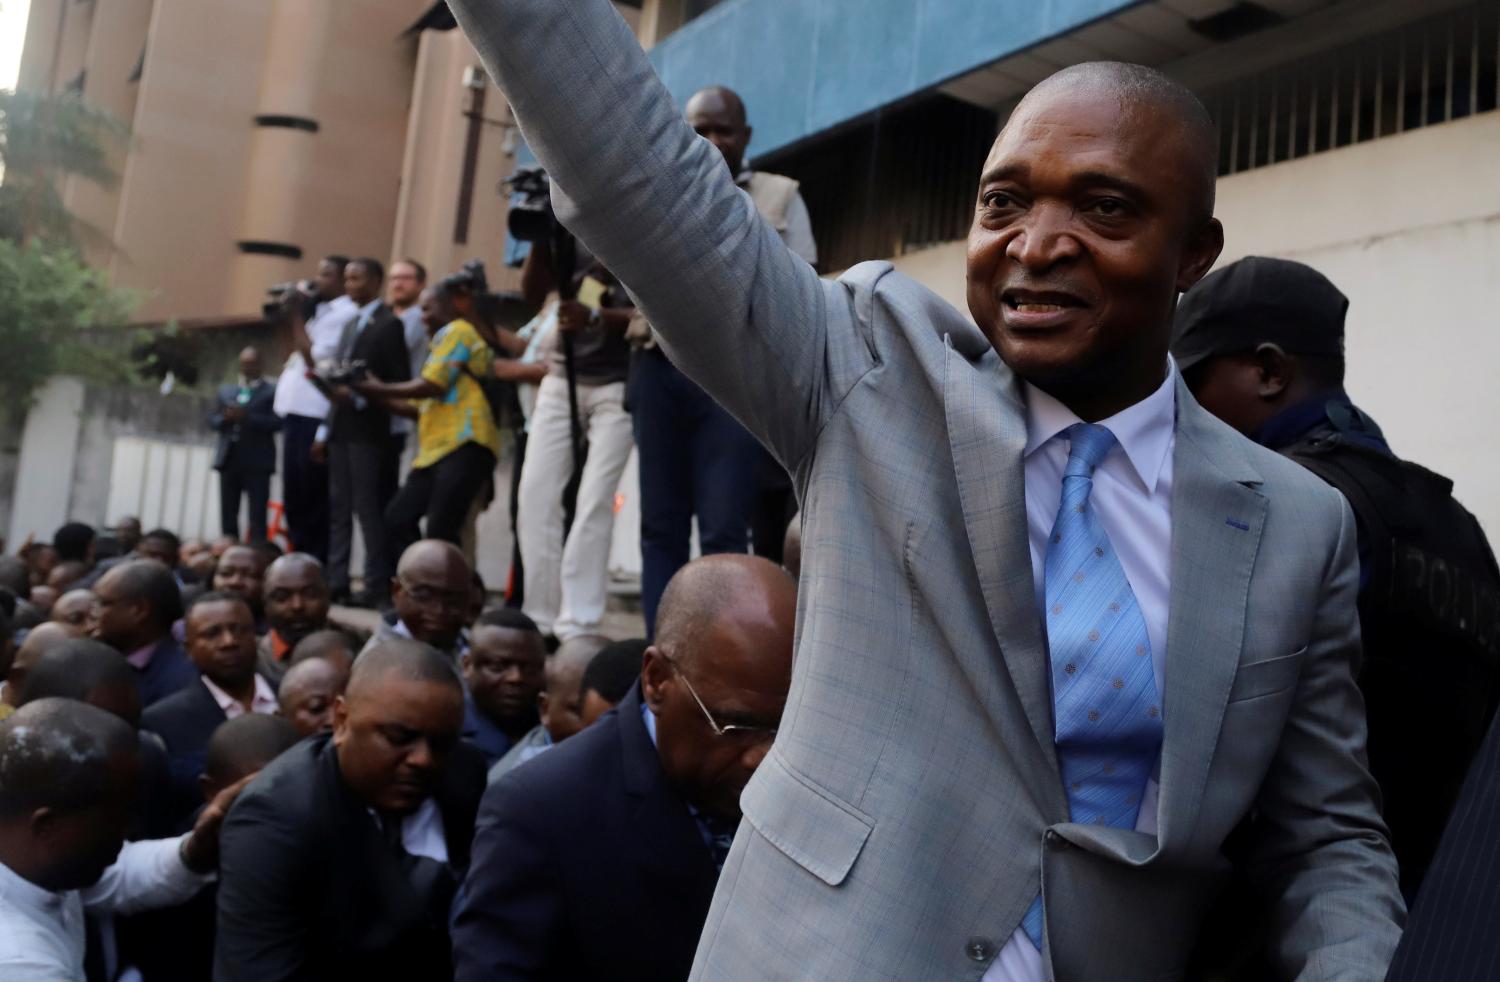 Former Congolese interior minister Emmanuel Ramazani Shadary waves to his supporters as he arrives to file his candidacy for the presidential election, at the Congo's electoral commission (CENI) head offices at the Gombe Municipality in Kinshasa, Democratic Republic of Congo, August 8, 2018. REUTERS/Kenny Katombe - RC1CD82EFFD0